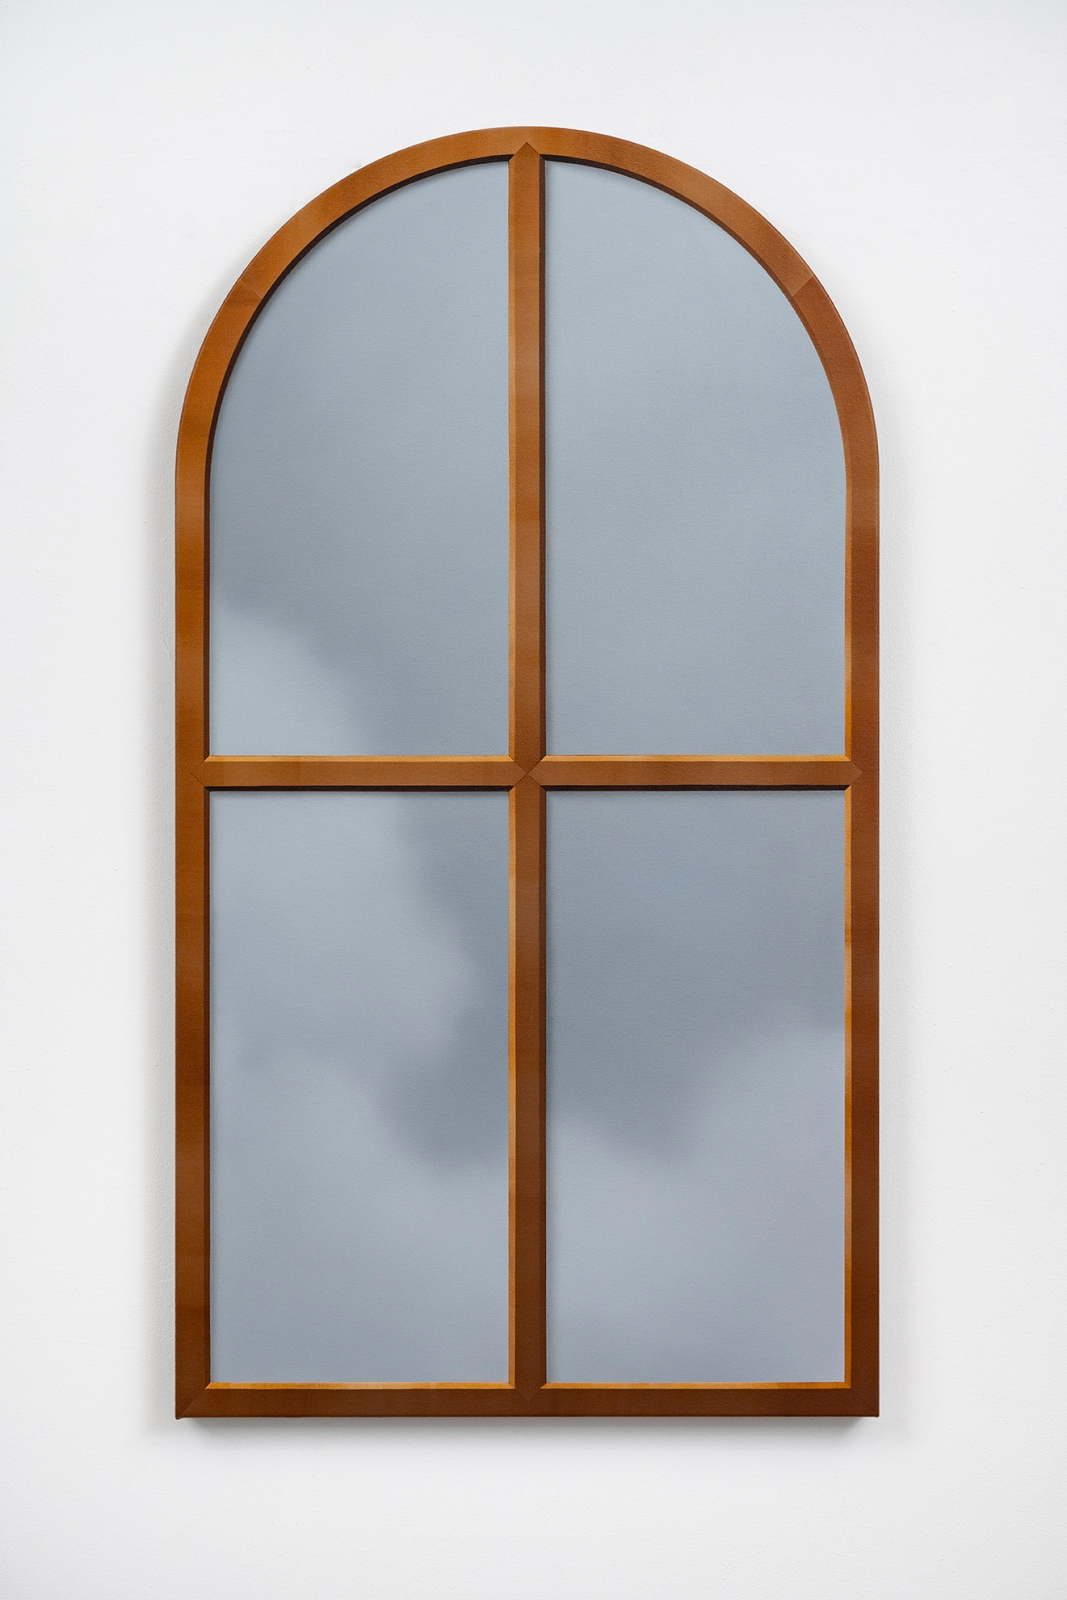 Christopher Page
Vel, 2022
oil on shaped canvas
43 1/4 x 23 5/8 x 1 3/8 ins.
110 x 60 x 3.6 cm